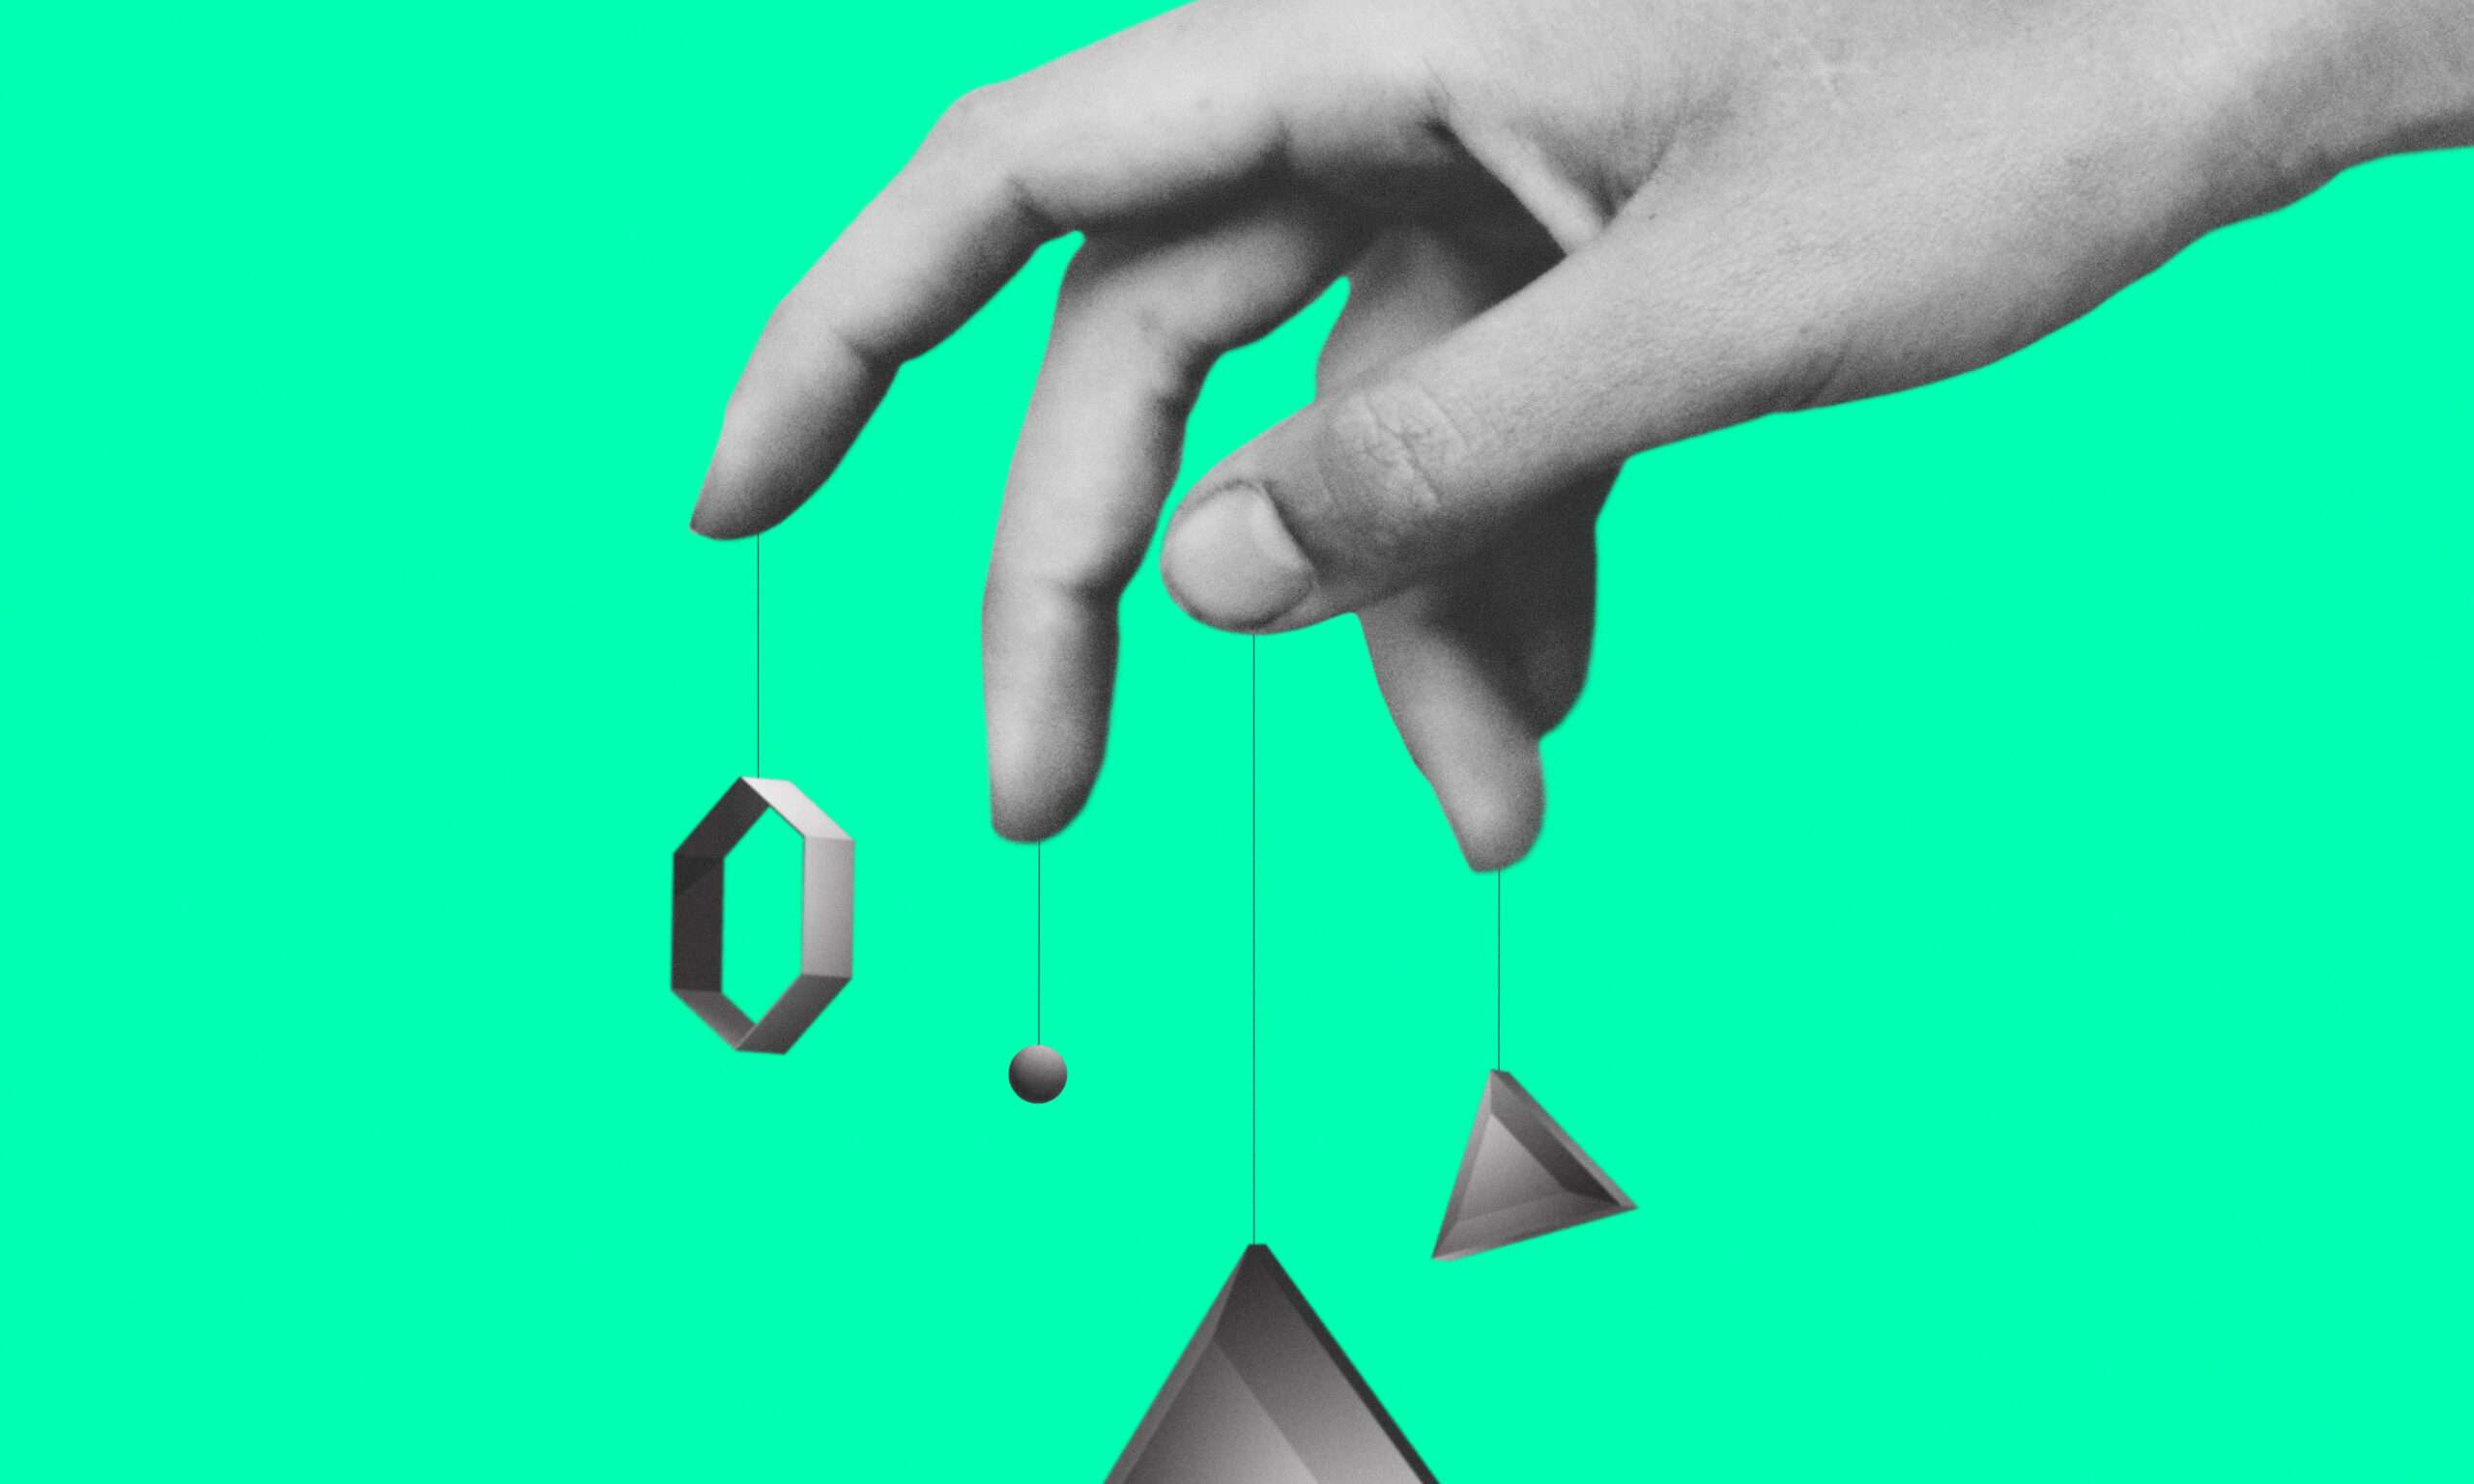 Graphic featuring objects dangling from a hand as part of an article about sales.